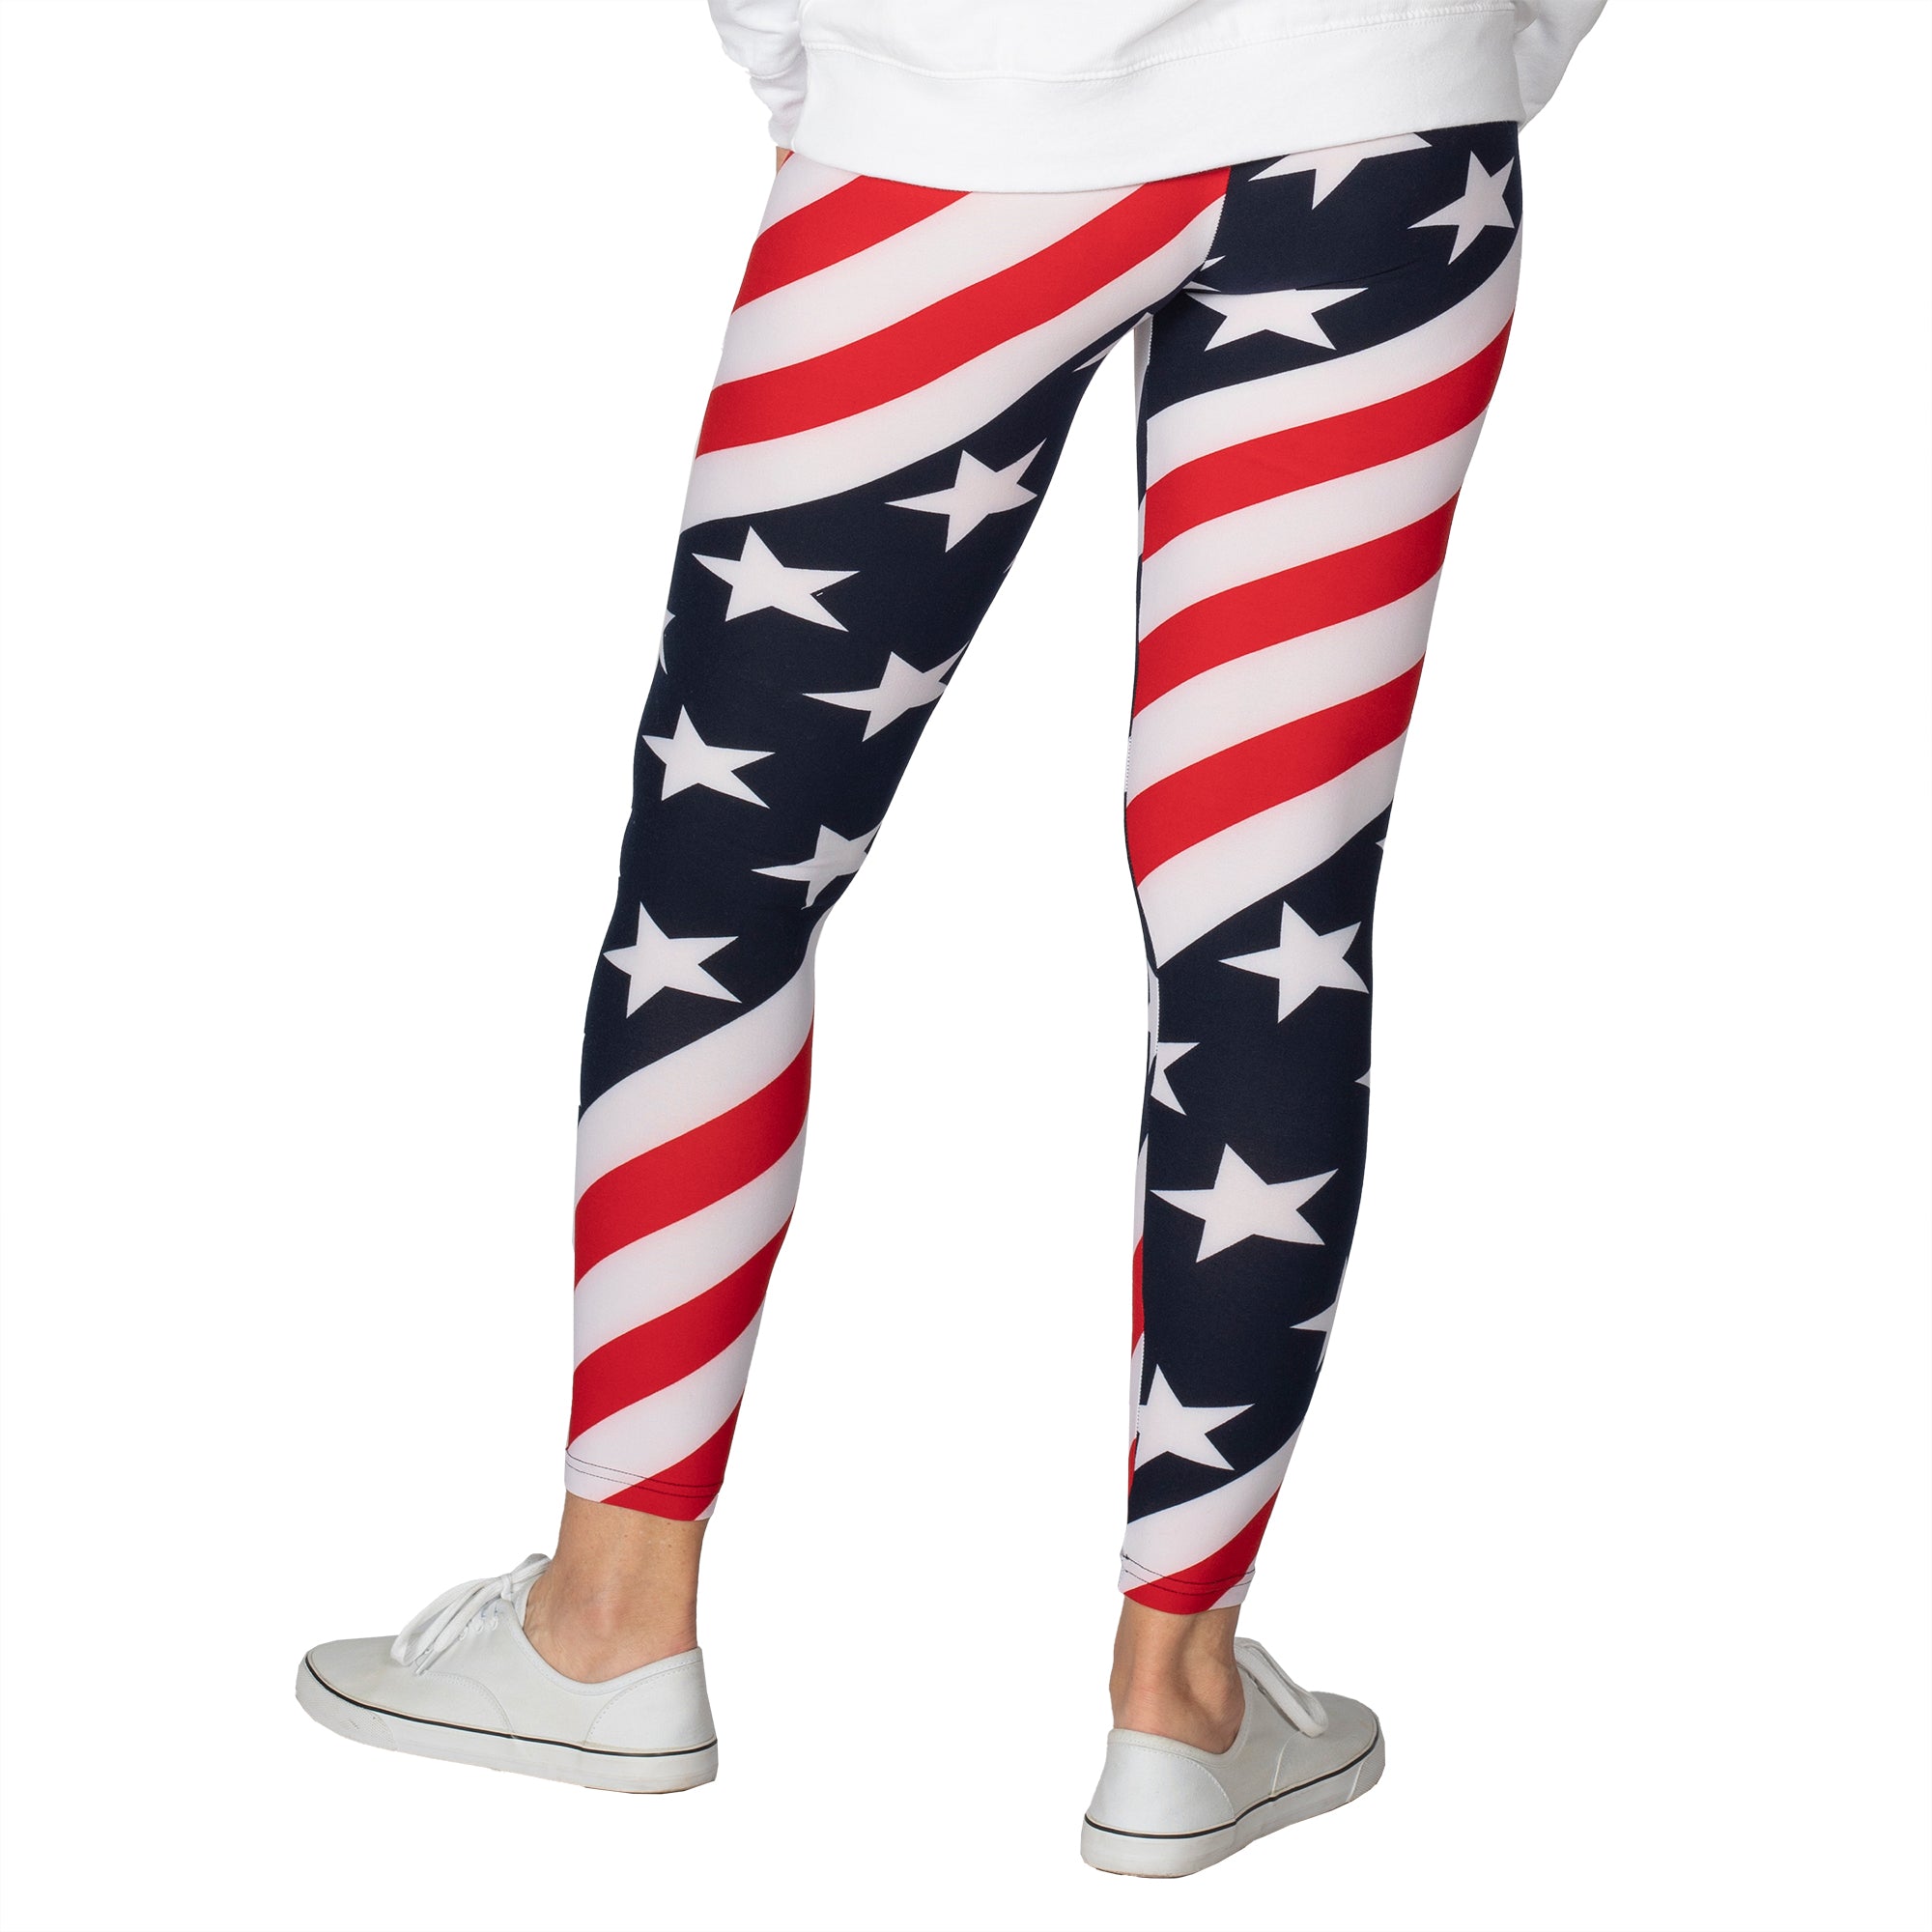 Women's American Flag Print Leggings. Full, Cropped or Yoga. Printed and  Sewn in USA. Polyester & Spandex Blend. Size XS-XL. Memorial Day. - Etsy